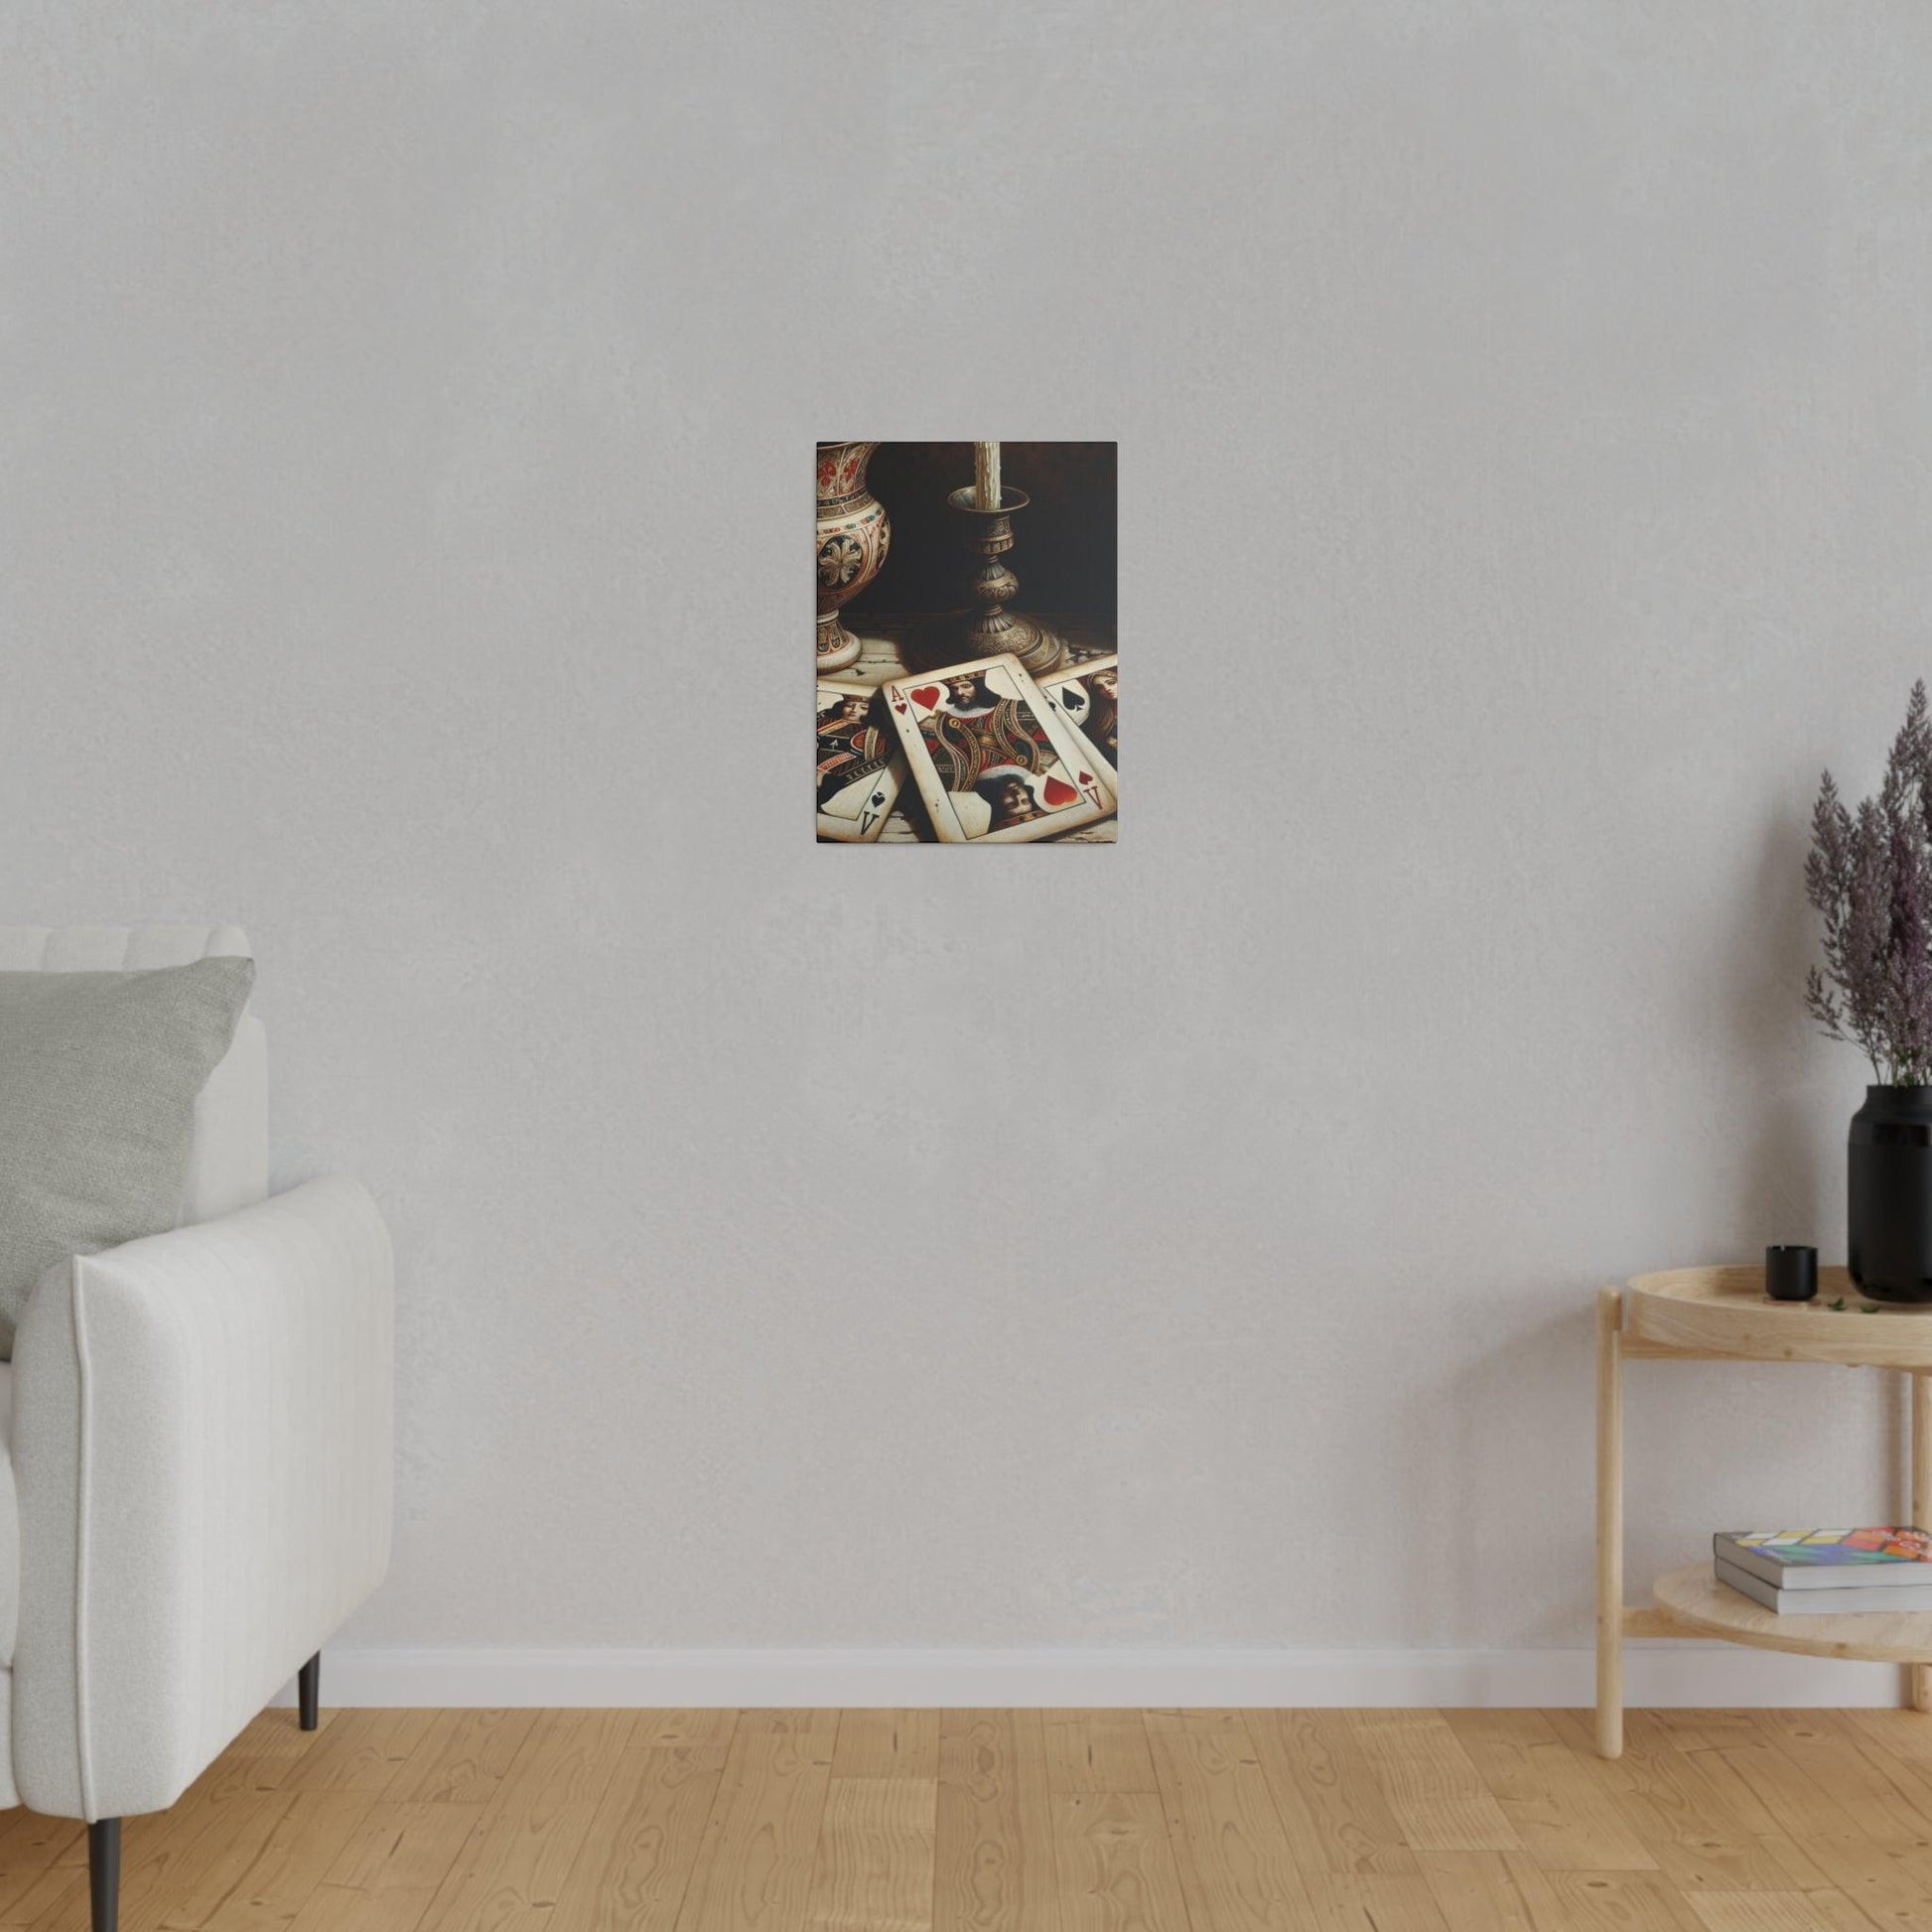 "Deck Deco: Playing Card Inspired Canvas Wall Art" - The Alice Gallery